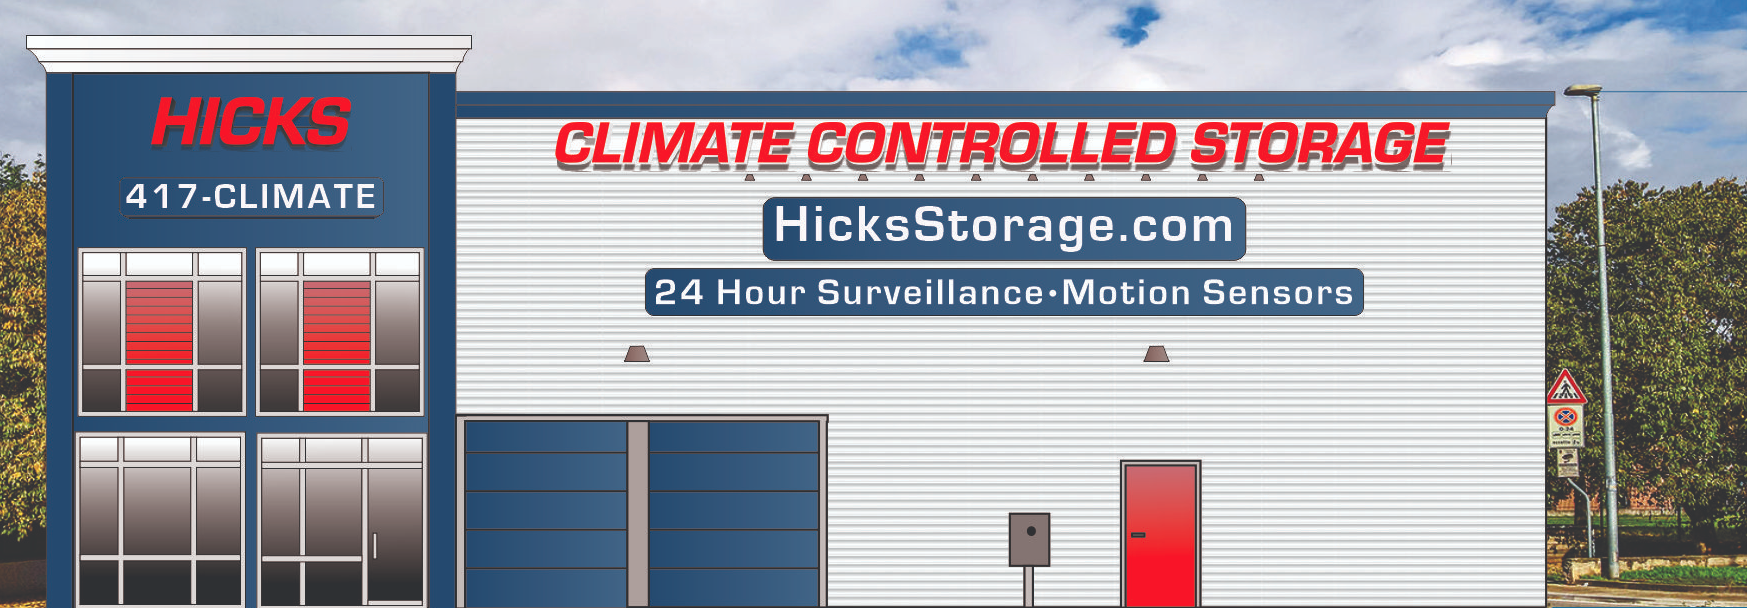 Hicks Climate Controlled Storage